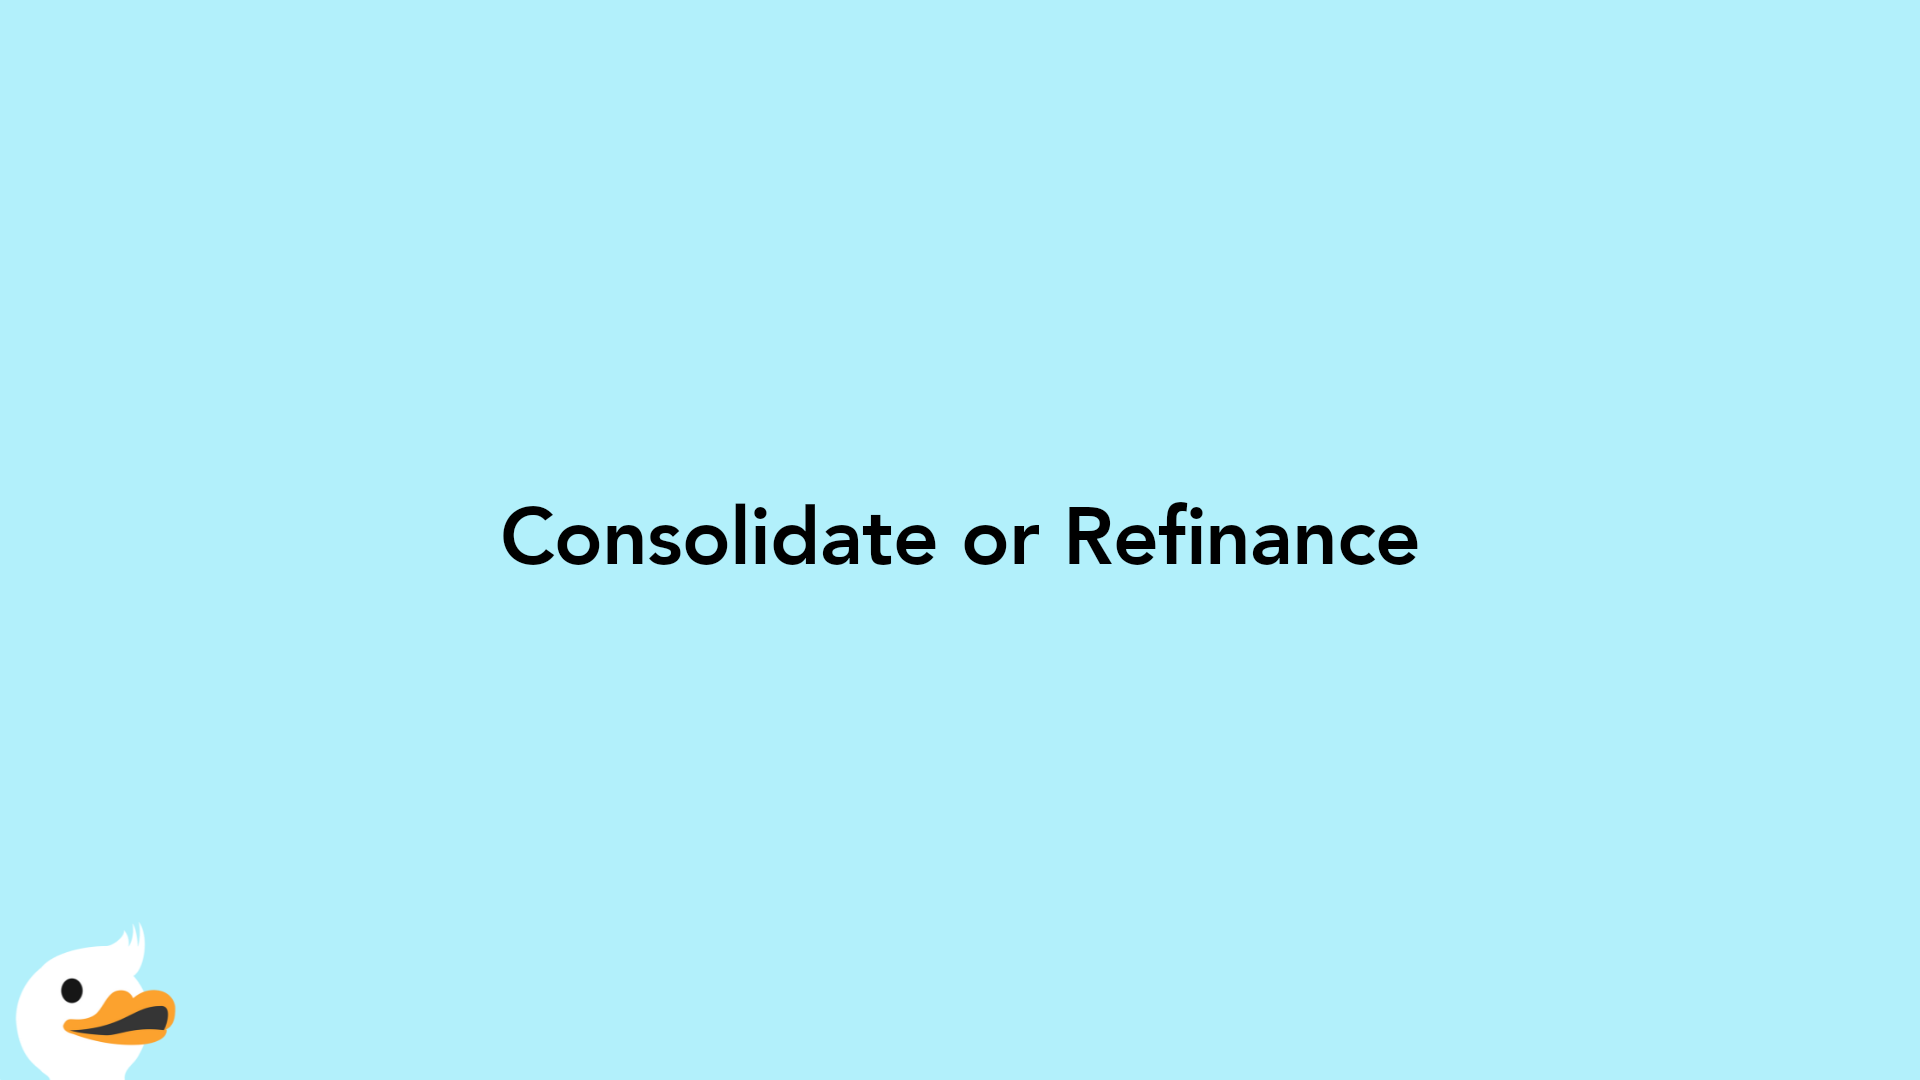 Consolidate or Refinance